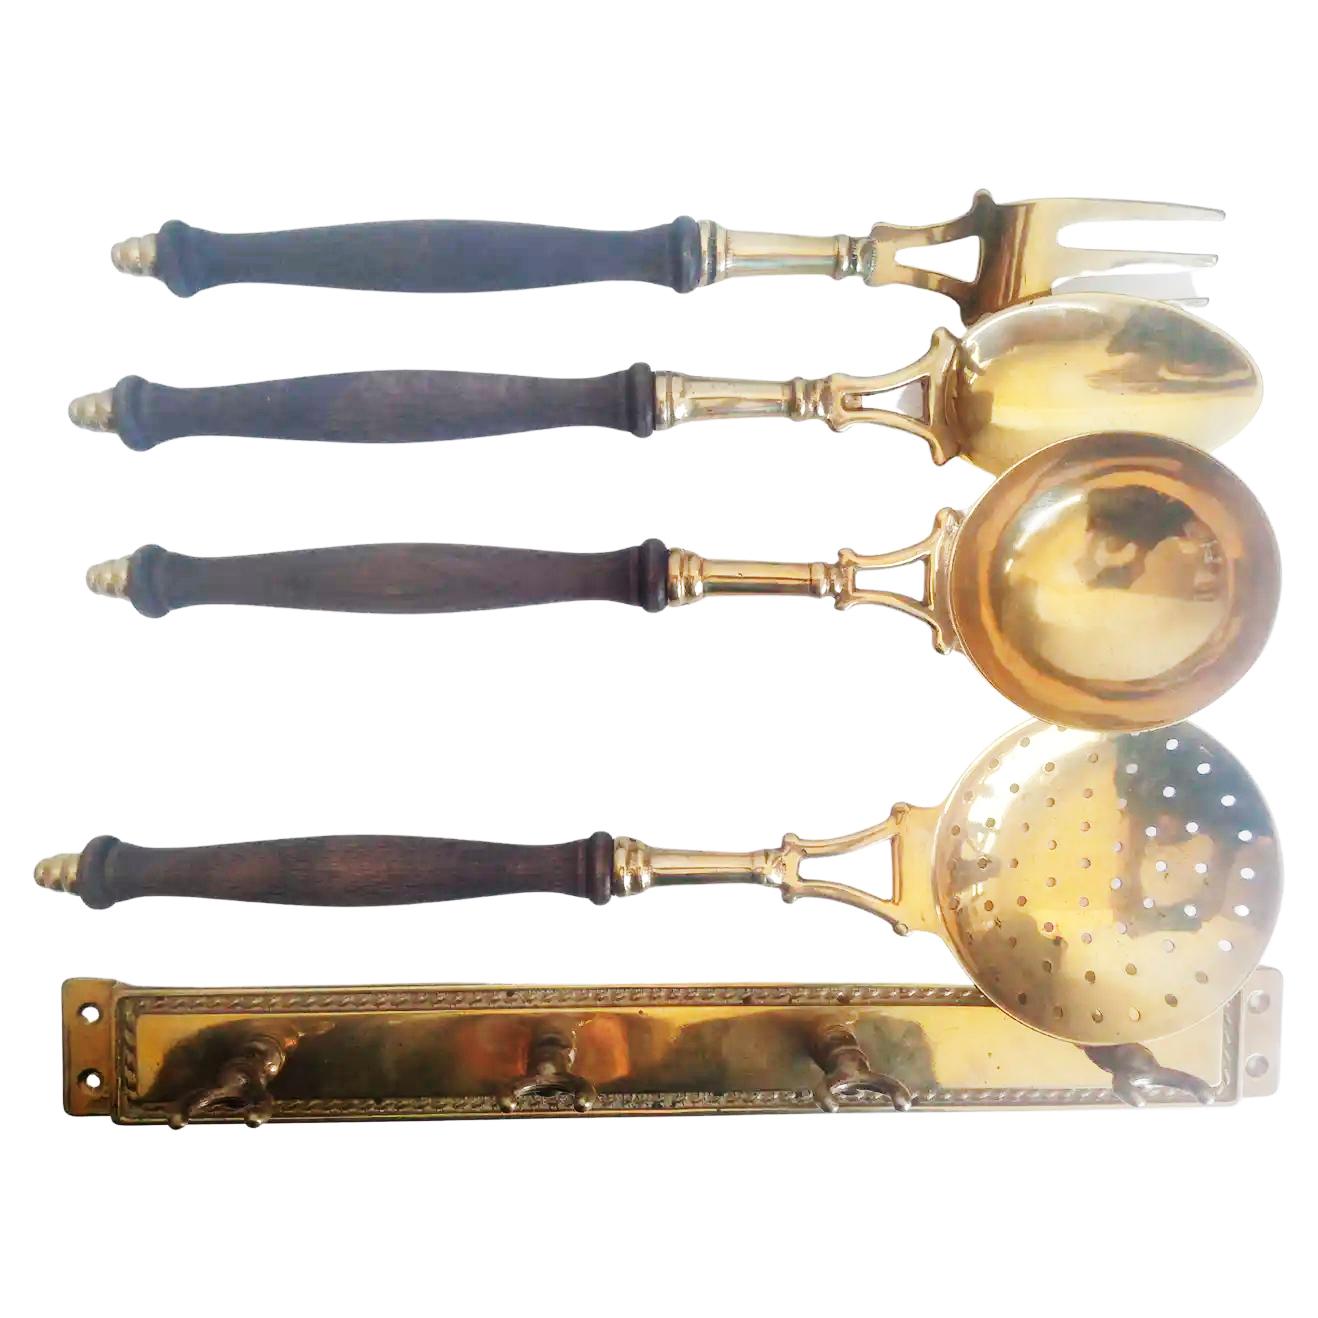 Old kitchen tools or utensils made of wood and brass hanging from a hanging bar. Old kitchen appliance
 Midcentury 

Saucepan fork palette and serving pot

This set of brass utensils is ideal to decorate a kitchen of any style, because its timeless